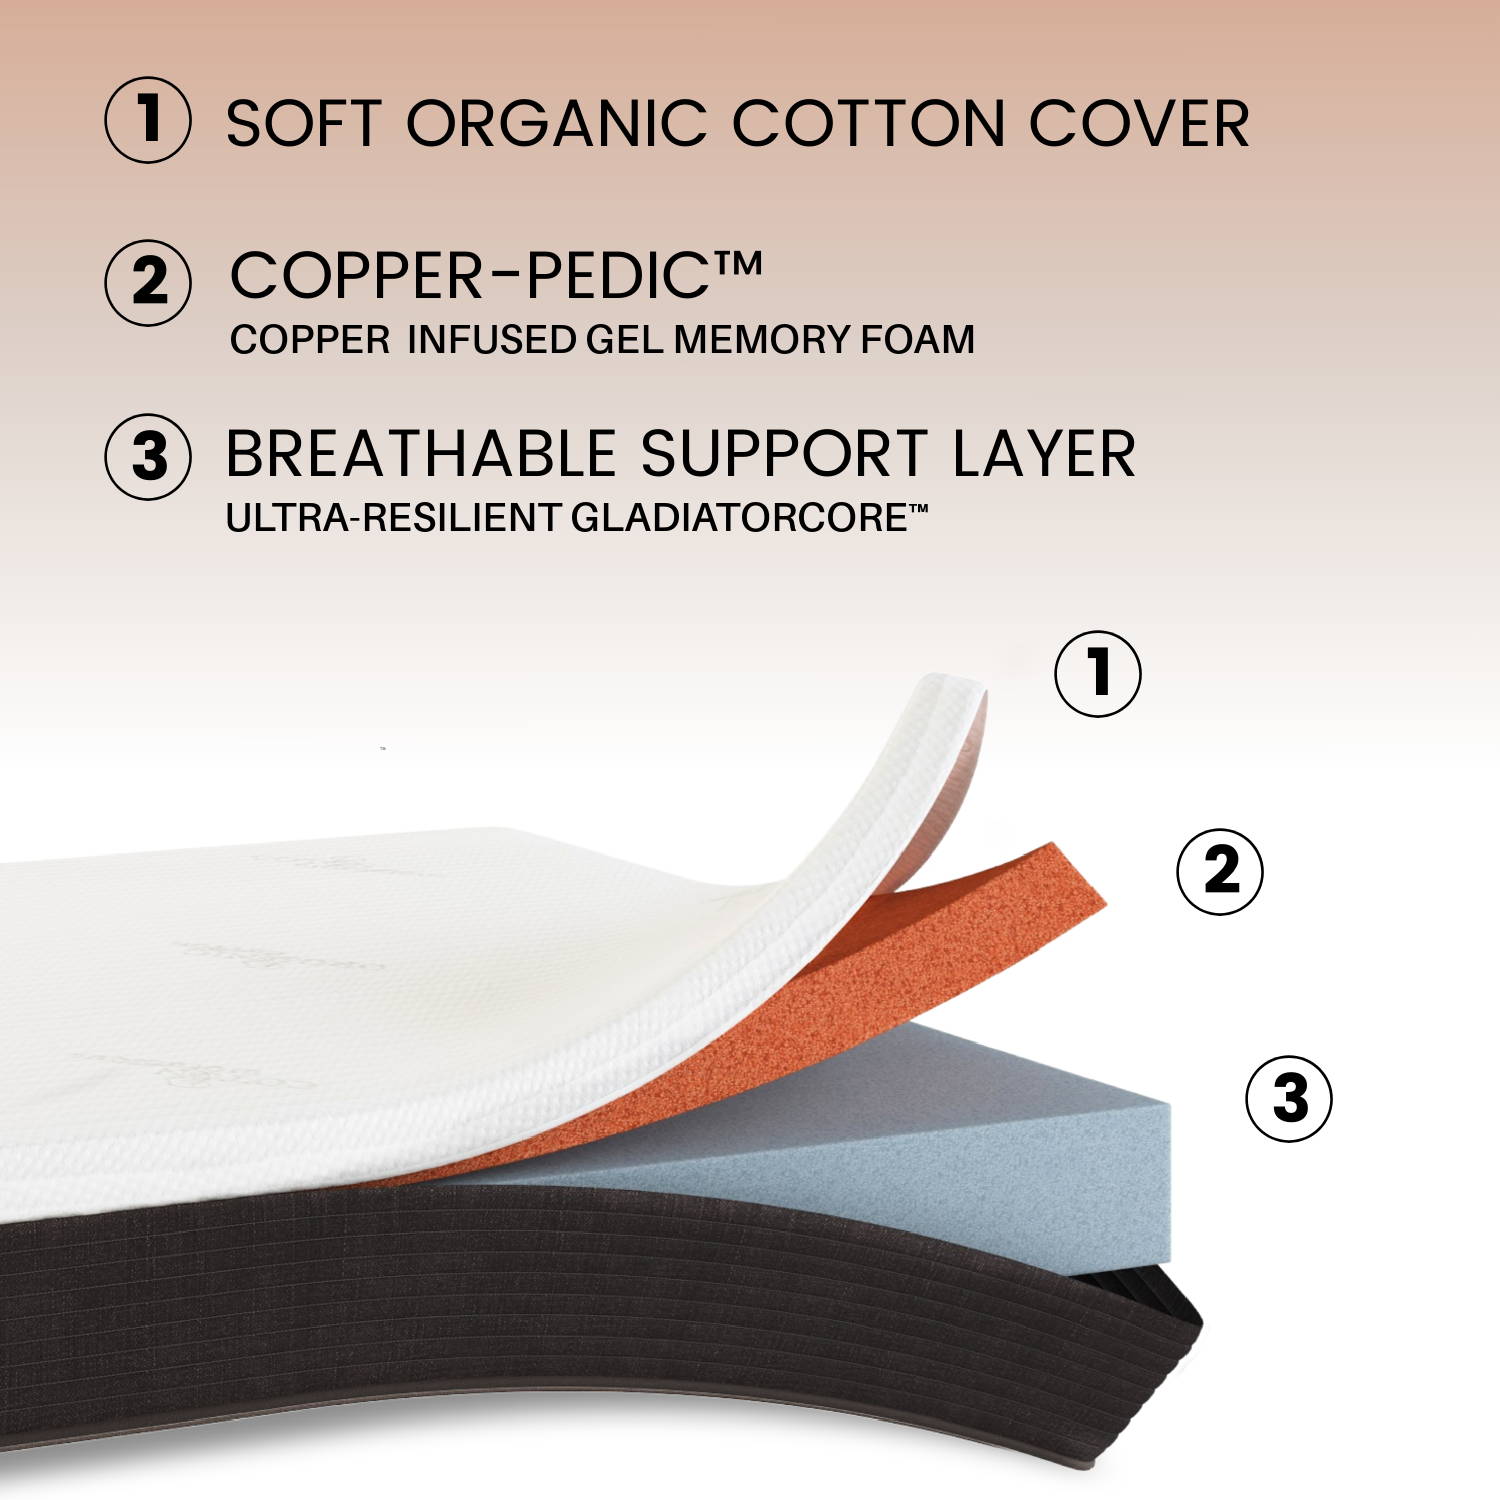 Open mattress with layers showing: soft organic cotton fabric, copper-infused cooling memory foam, breathable support foam made from plant-based GladiatorCore foam.